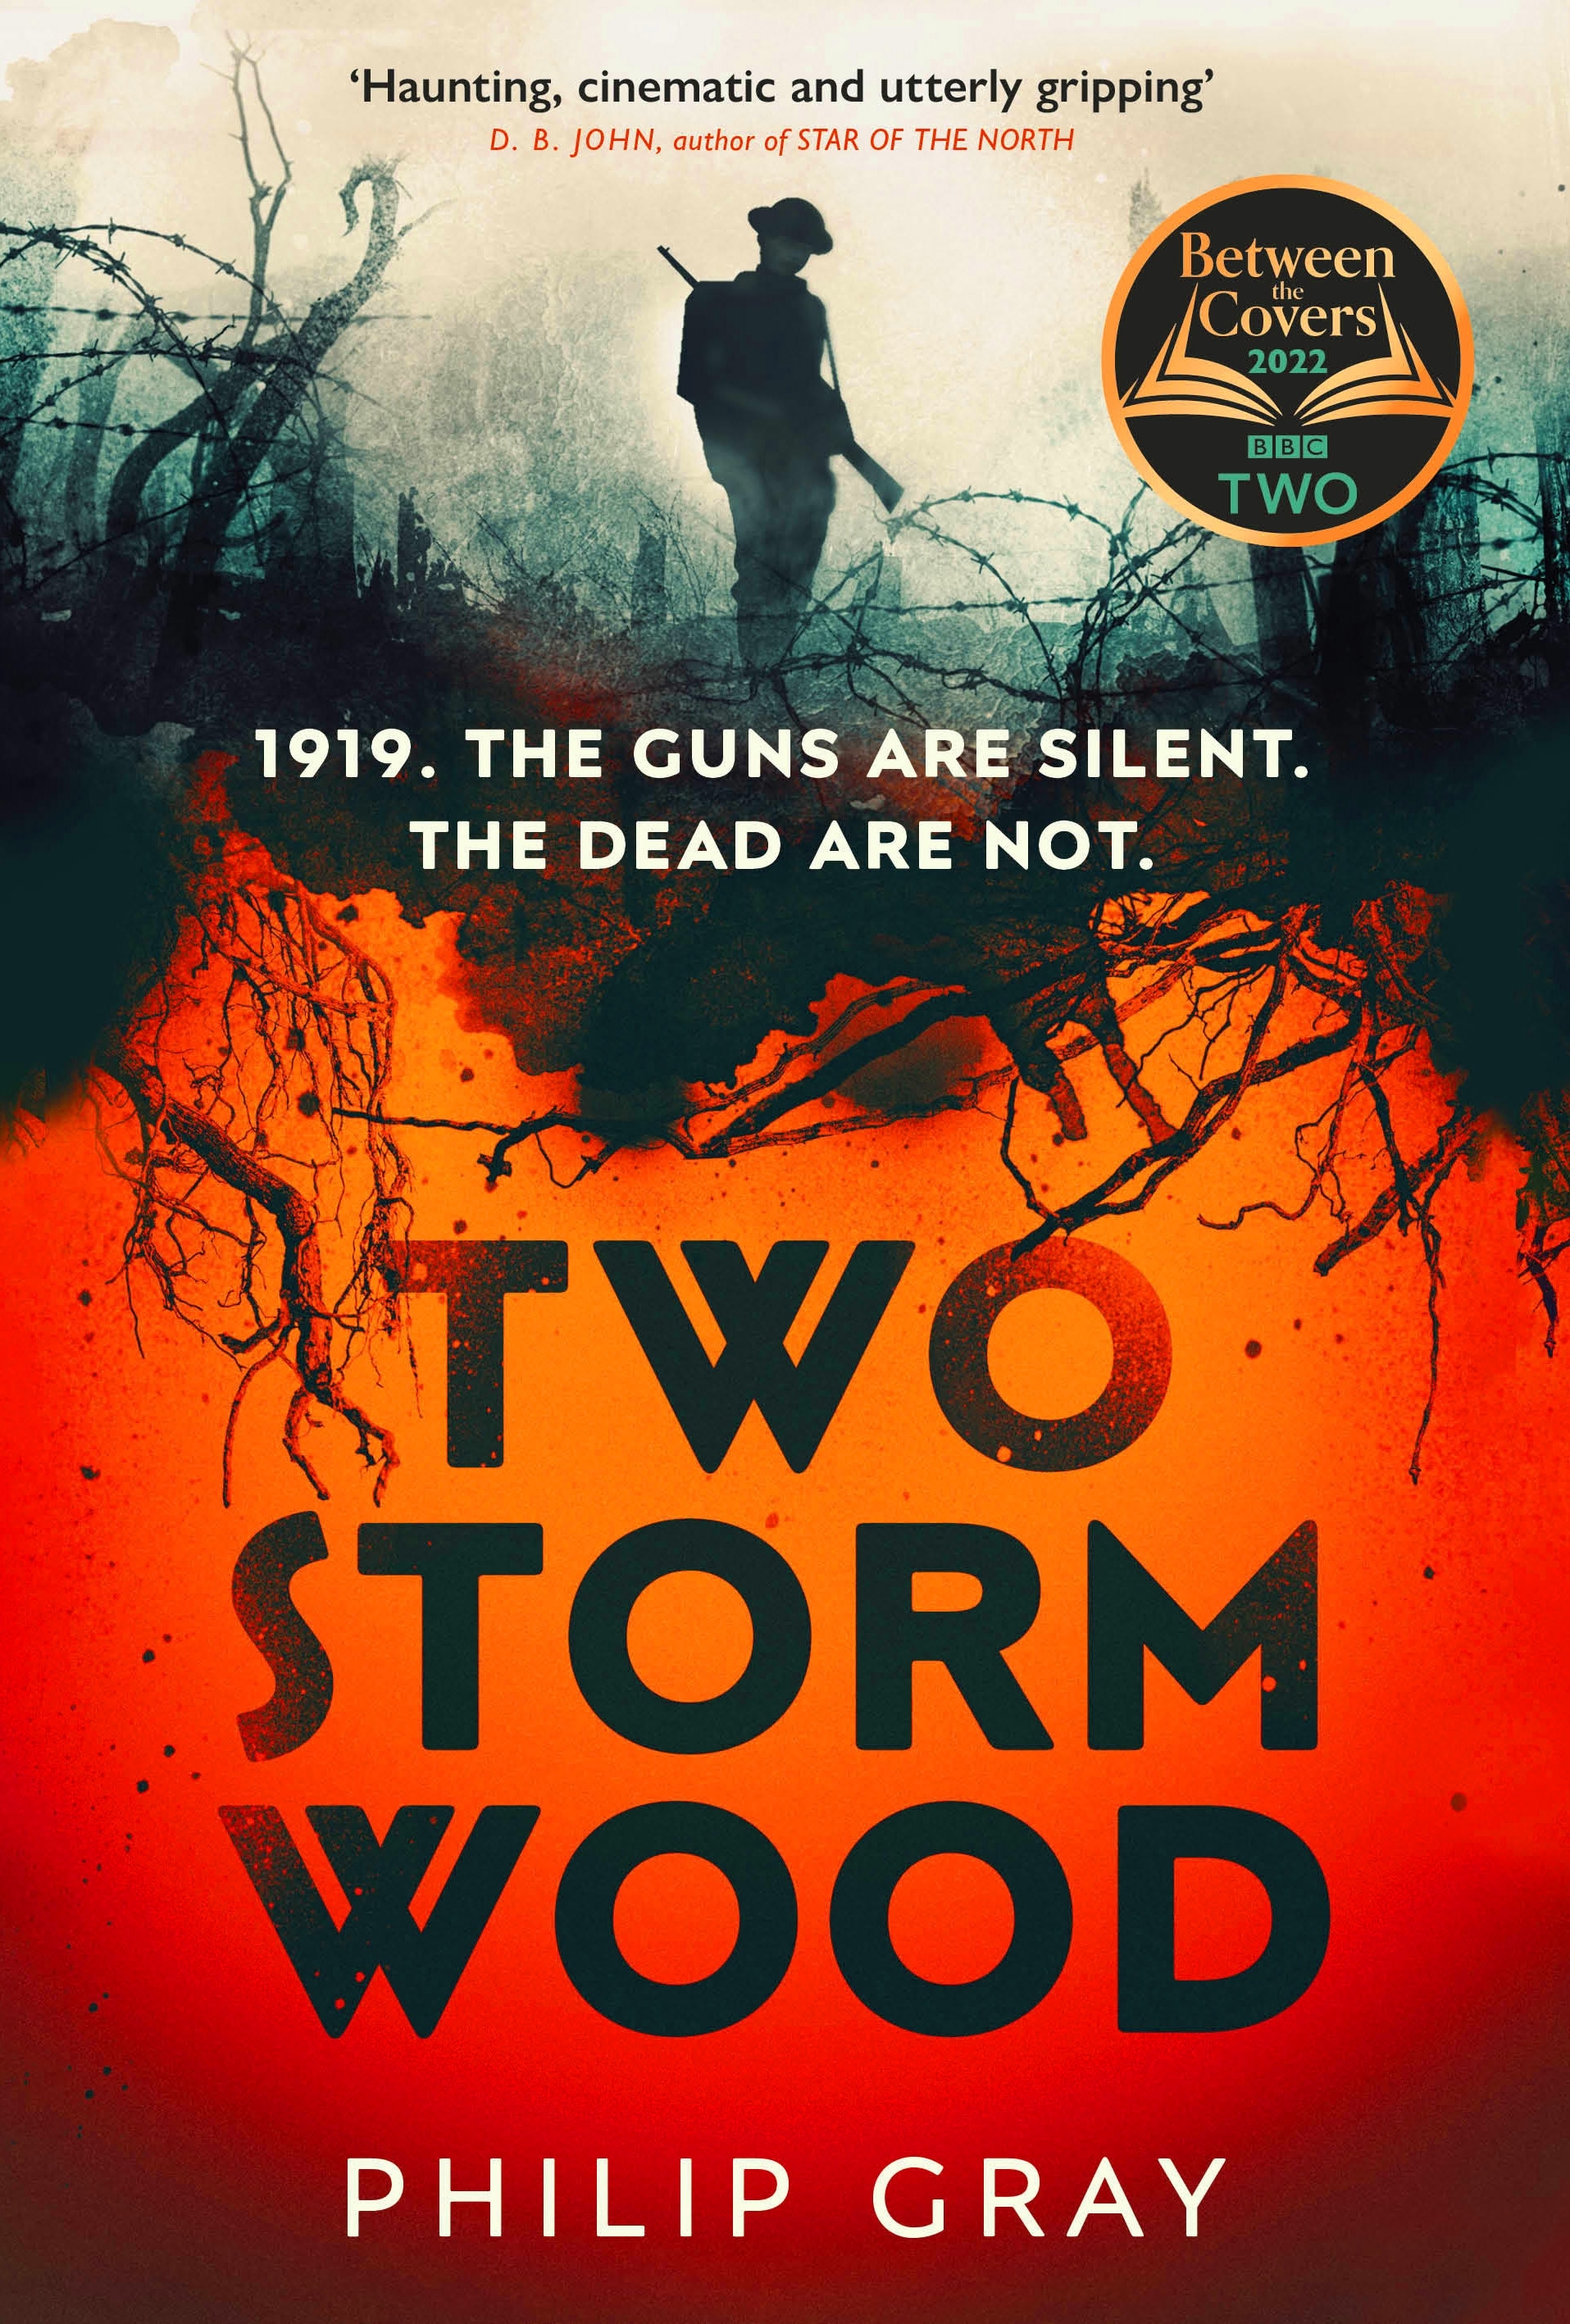 Book “Two Storm Wood” by Philip Gray — January 5, 2023